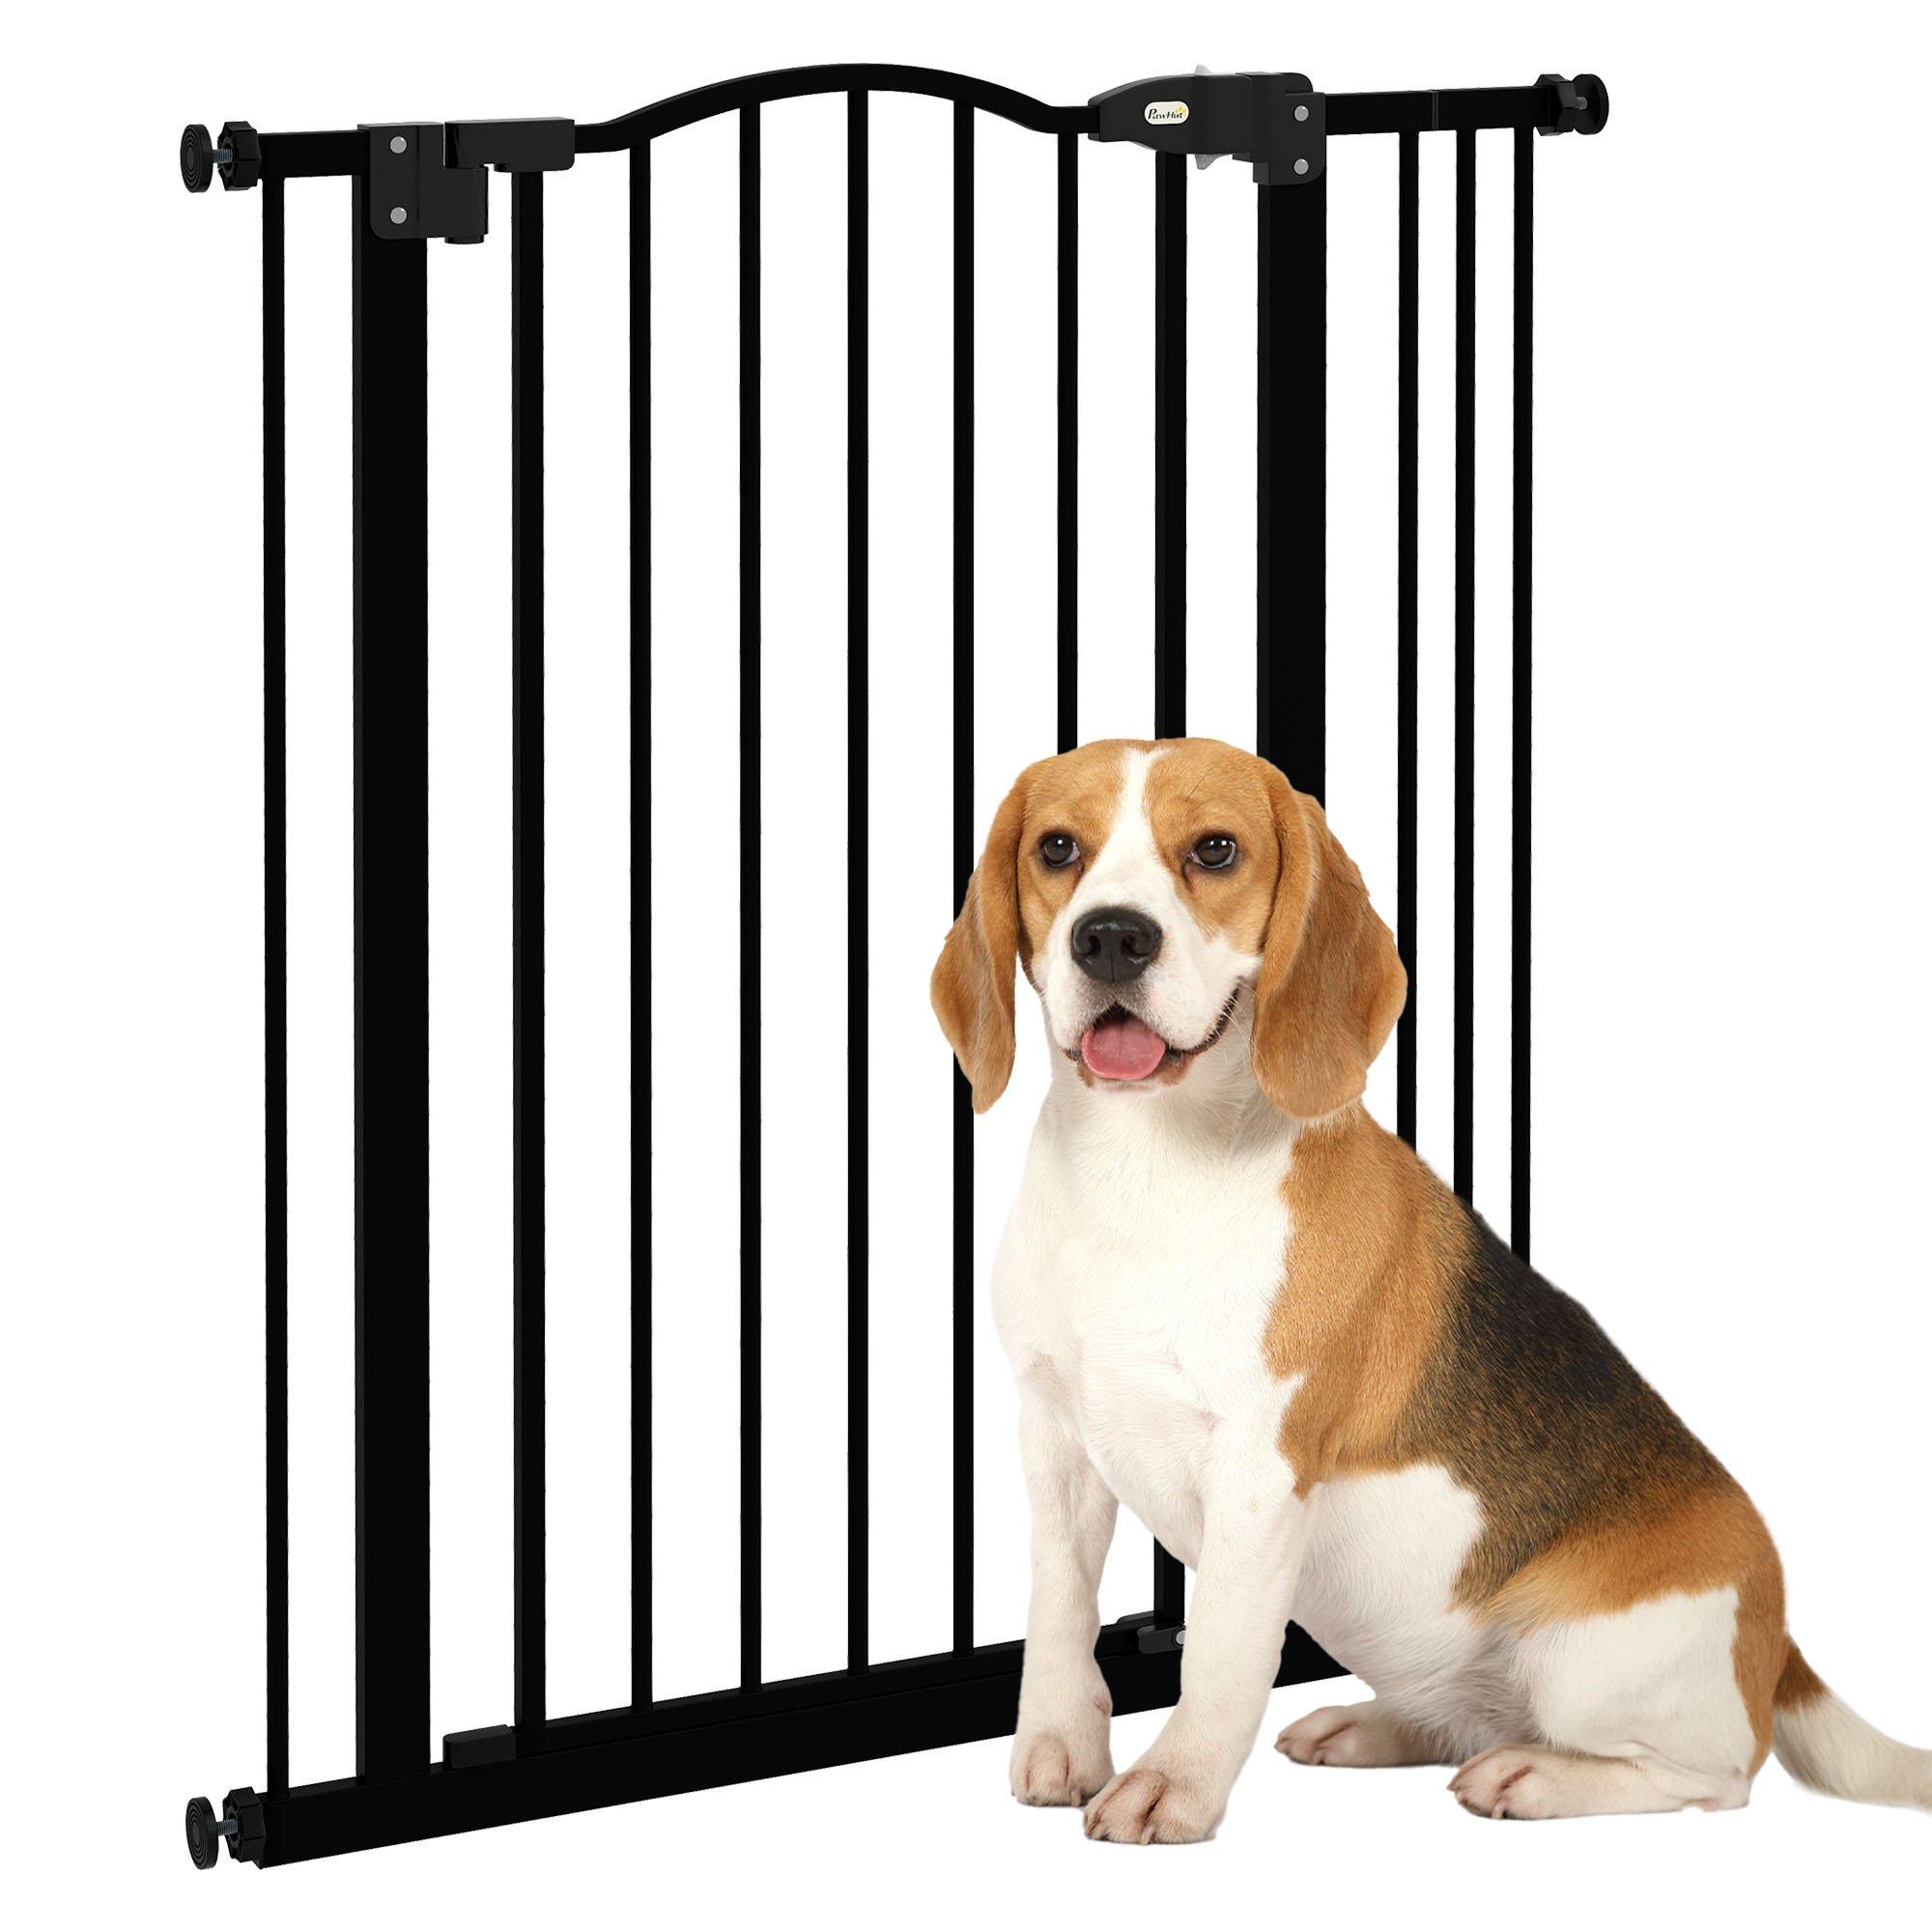 74-87cm Adjustable Metal Pet Gate Safety Barrier with Auto-Close Door